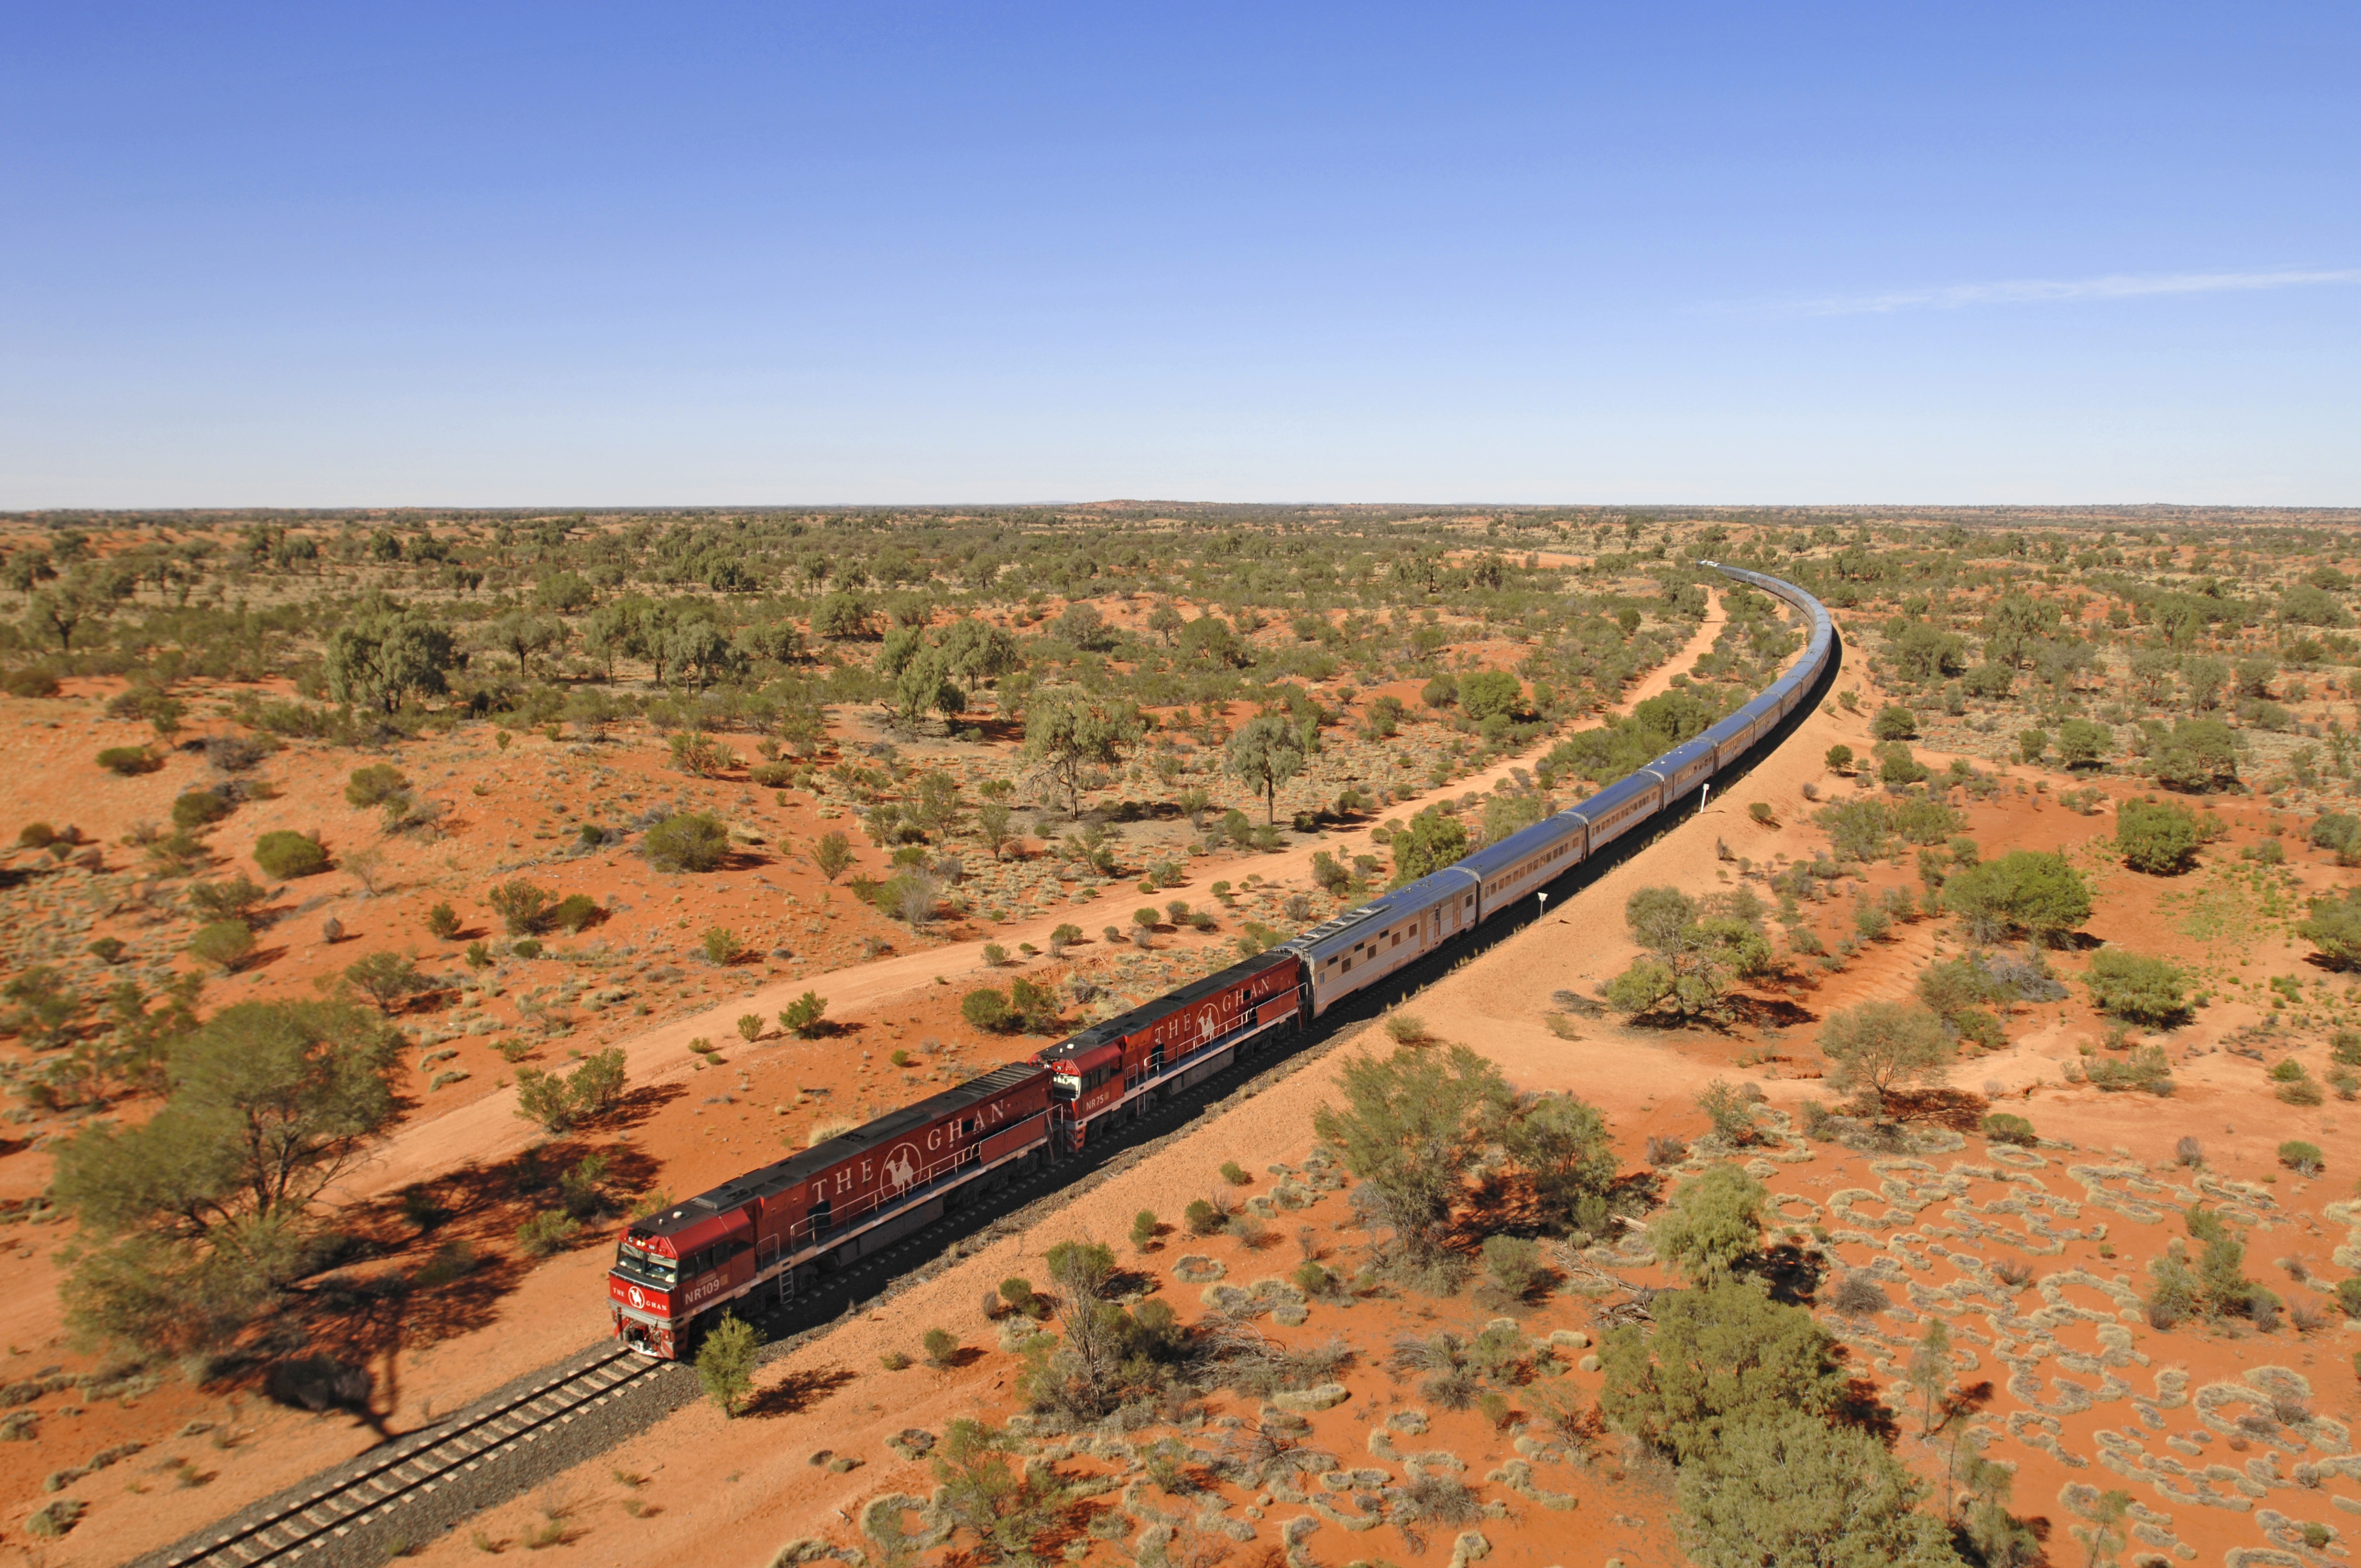 The Ghan Wallpapers